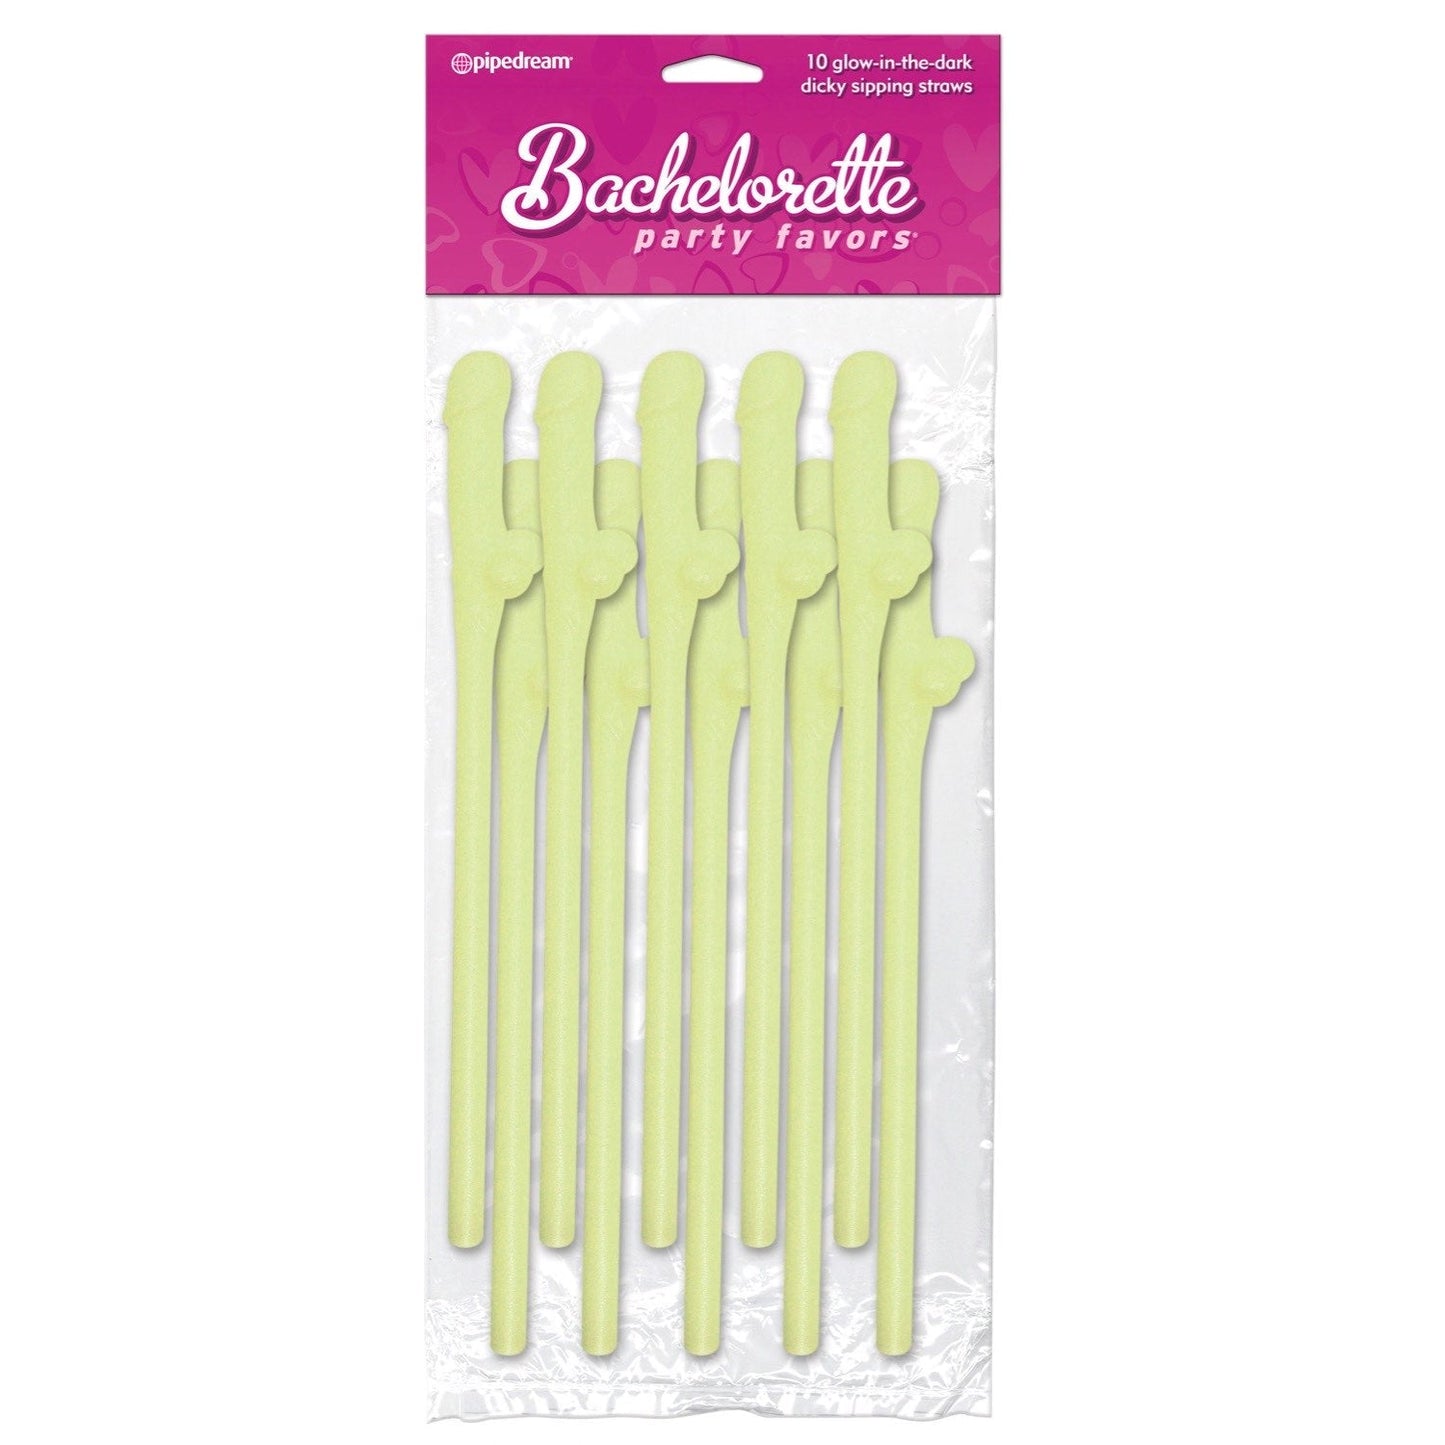 Dicky Sipping Straws - Glow in the Dark Straws - Set of 10